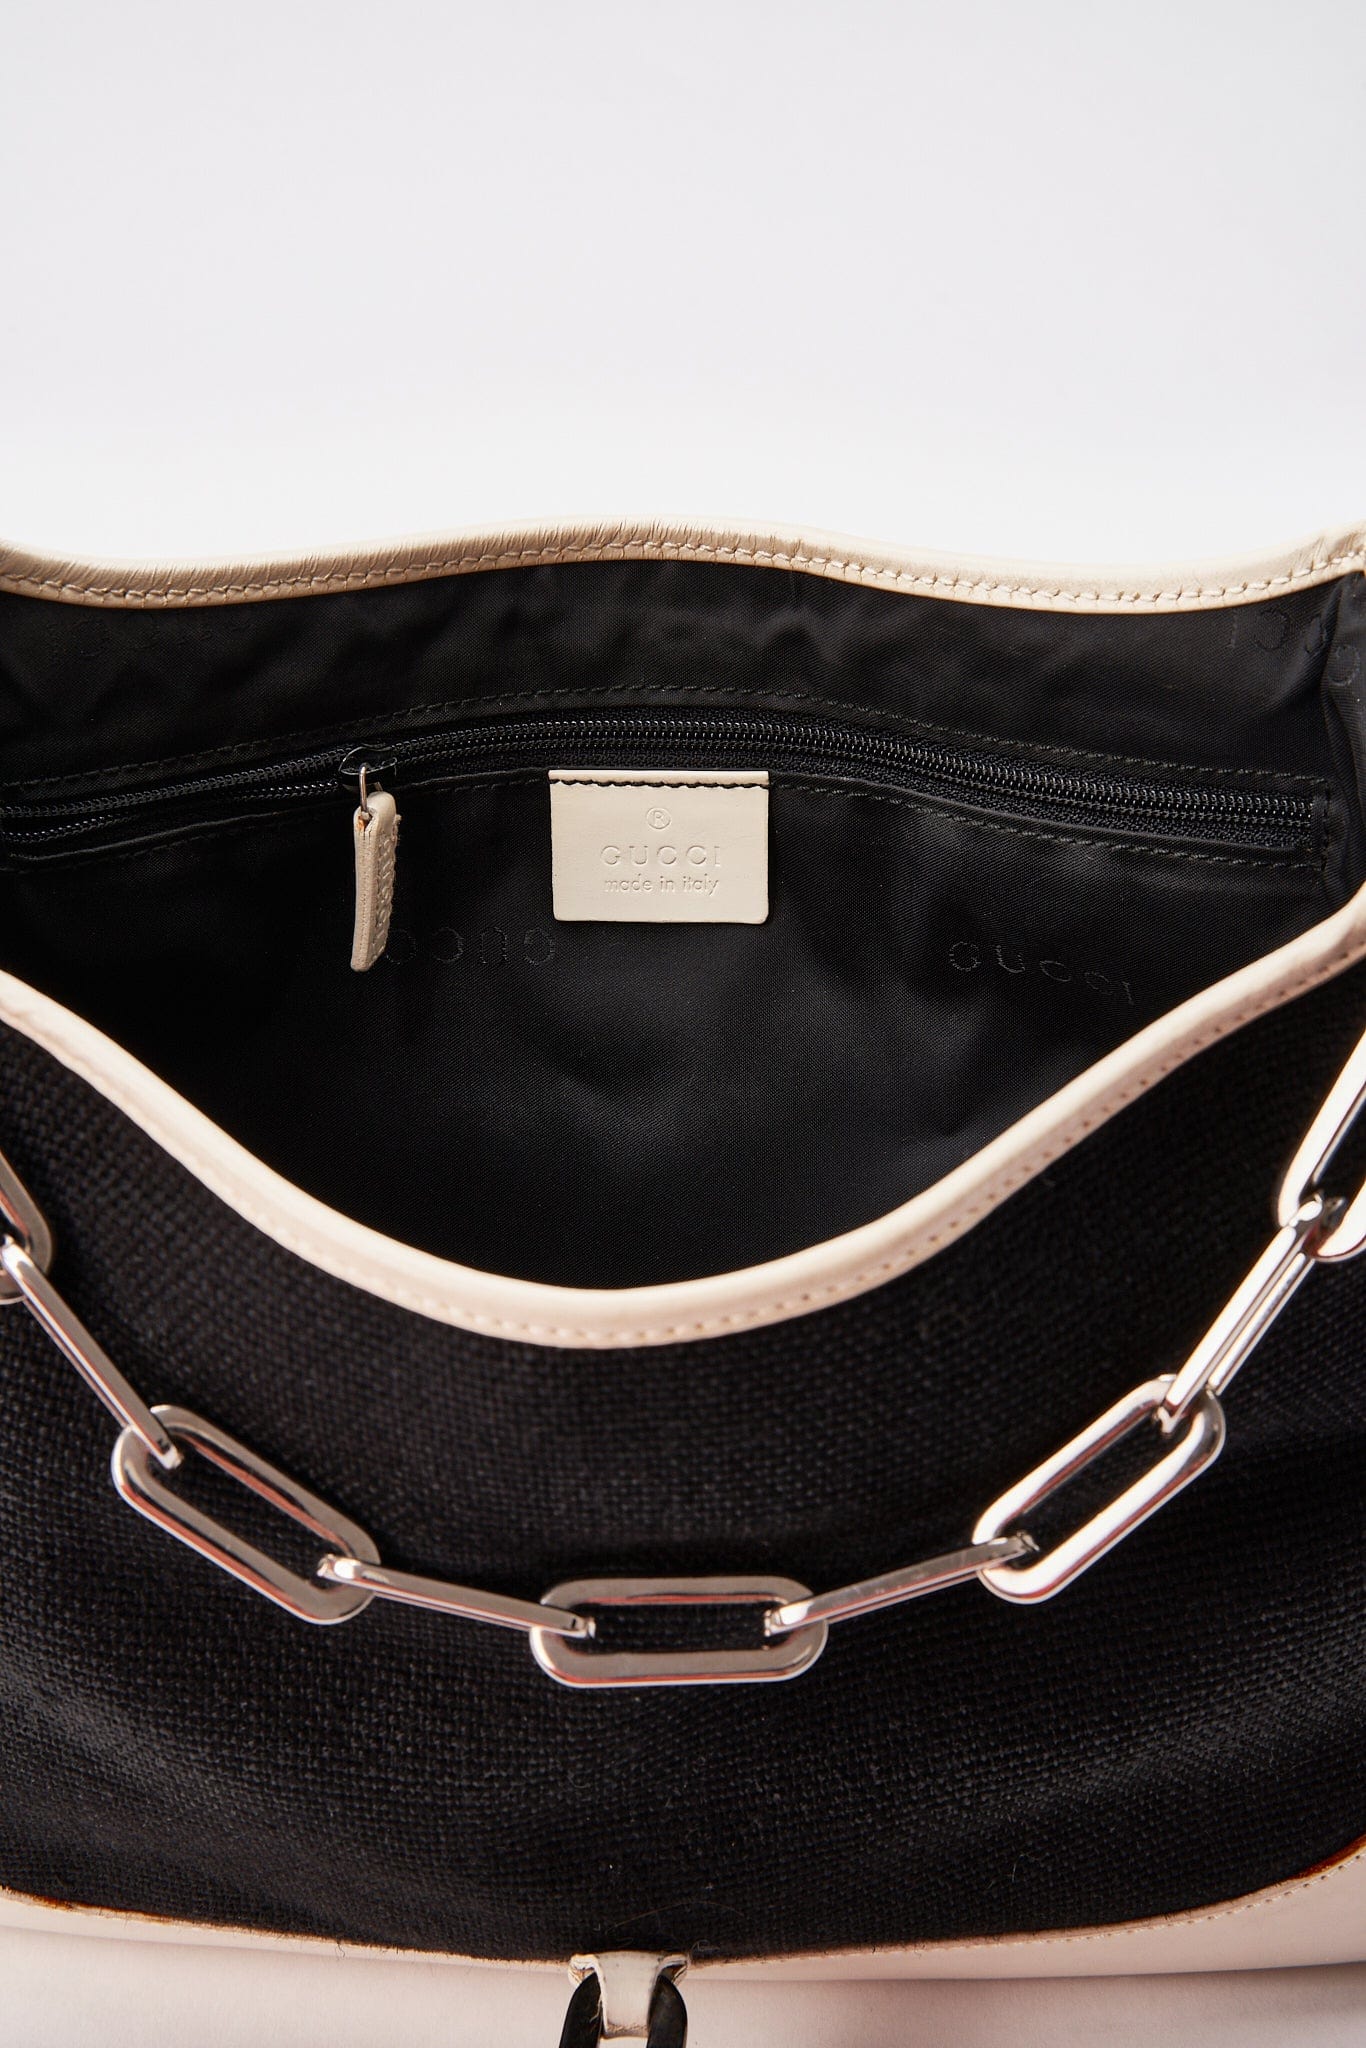 Vintage Gucci Jackie Shoulder Bag with Silver Chain